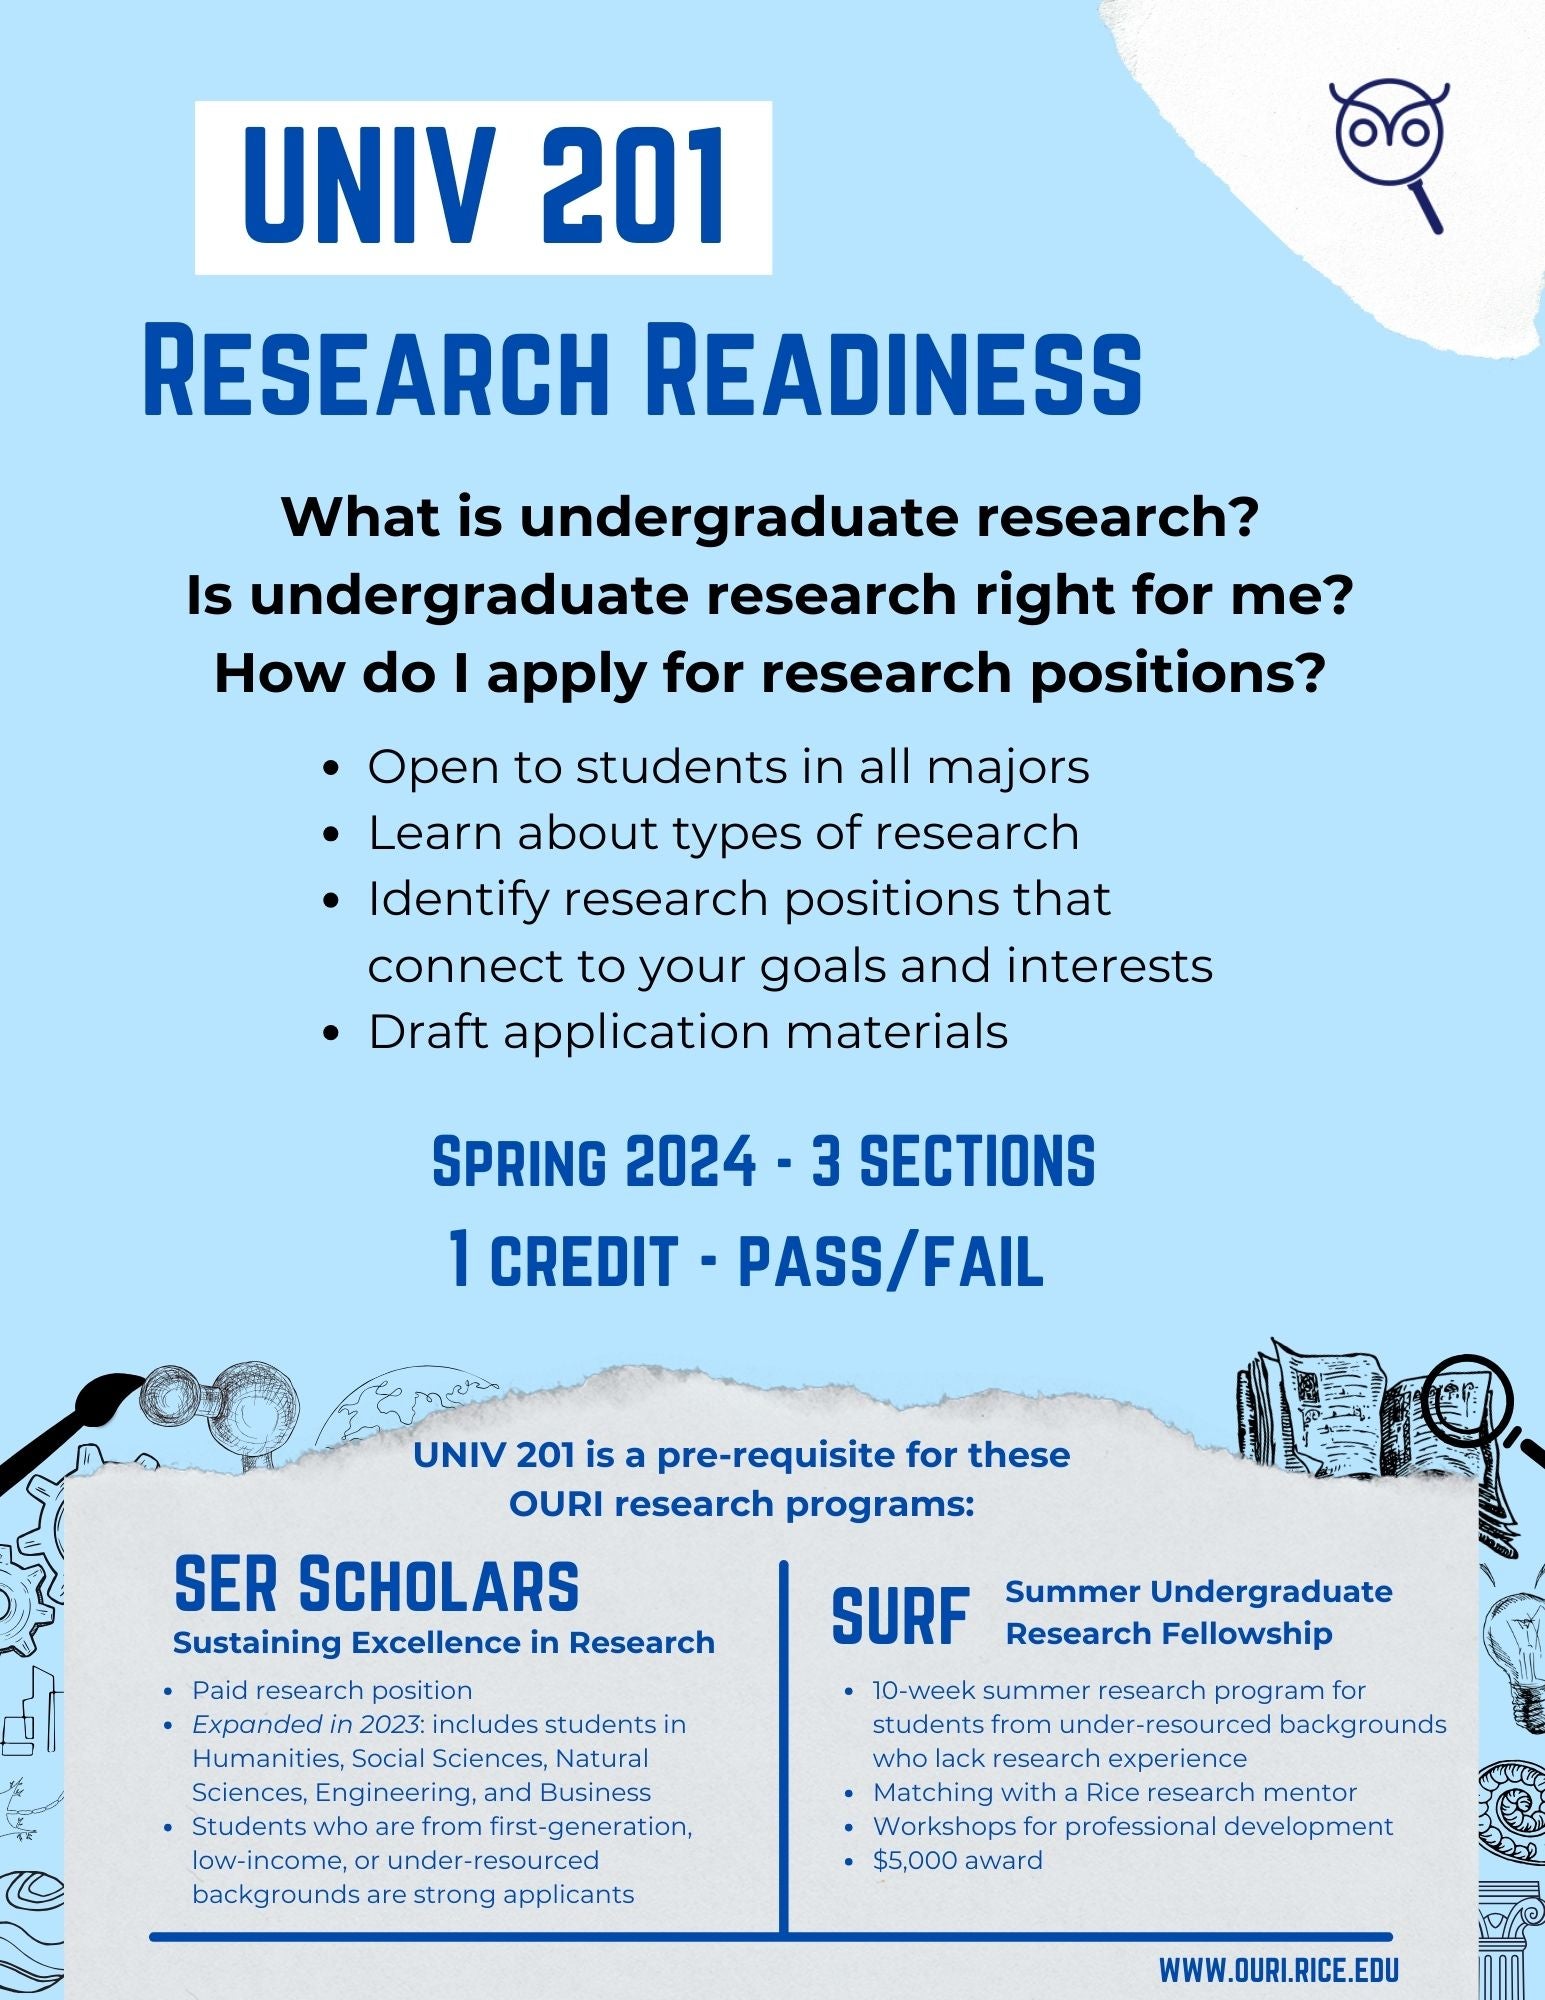 This is a flyer for UNIV 201 – Research Readiness  This form has 3 sections –   1.	What is covered in UNIV 201? 2.	Who should take UNIV 201? 3.	Why take UNIV 201?  Section 1 –  UNIV 201 is a course open to all Rice undergraduate students. The course covers topics such as: What is undergraduate research?  Is undergraduate research right for me?  How do I apply for research positions?  Section 2 – Who should take UNIV 201? UNIV 201 is open to all Rice University undergraduate students regardless of majors. It is especially helpful for individuals interested in learning about types of research, want assistance identifying research interests and opportunities, and seeking assistance with drafting application materials for various OURI programs. Section 3 – Why take UNIV 201? UNIV 201 is a pre-requisite for various OURI research programs. These include Sustaining Excellence in Research (SER) and Summer Undergraduate Research Fellowship (SURF).  SER is a paid research position. As of fall 2023 it is open to students across the Humanities, Social Sciences, Natural Sciences, Engineering, and Business. Students from first-generation, low-income, or under-resourced backgrounds are strongly encouraged to apply.  SURF is a 10-week summer research program for students from under-resourced backgrounds who lack research experience. SURF scholars are matched with a Rice research mentor. SURF participation includes professional development workshops and a $5,000 reward.  For more information on these opportunities or others offered through the Office of Undergraduate Research and Inquiry please visit www.ouri.rice.edu